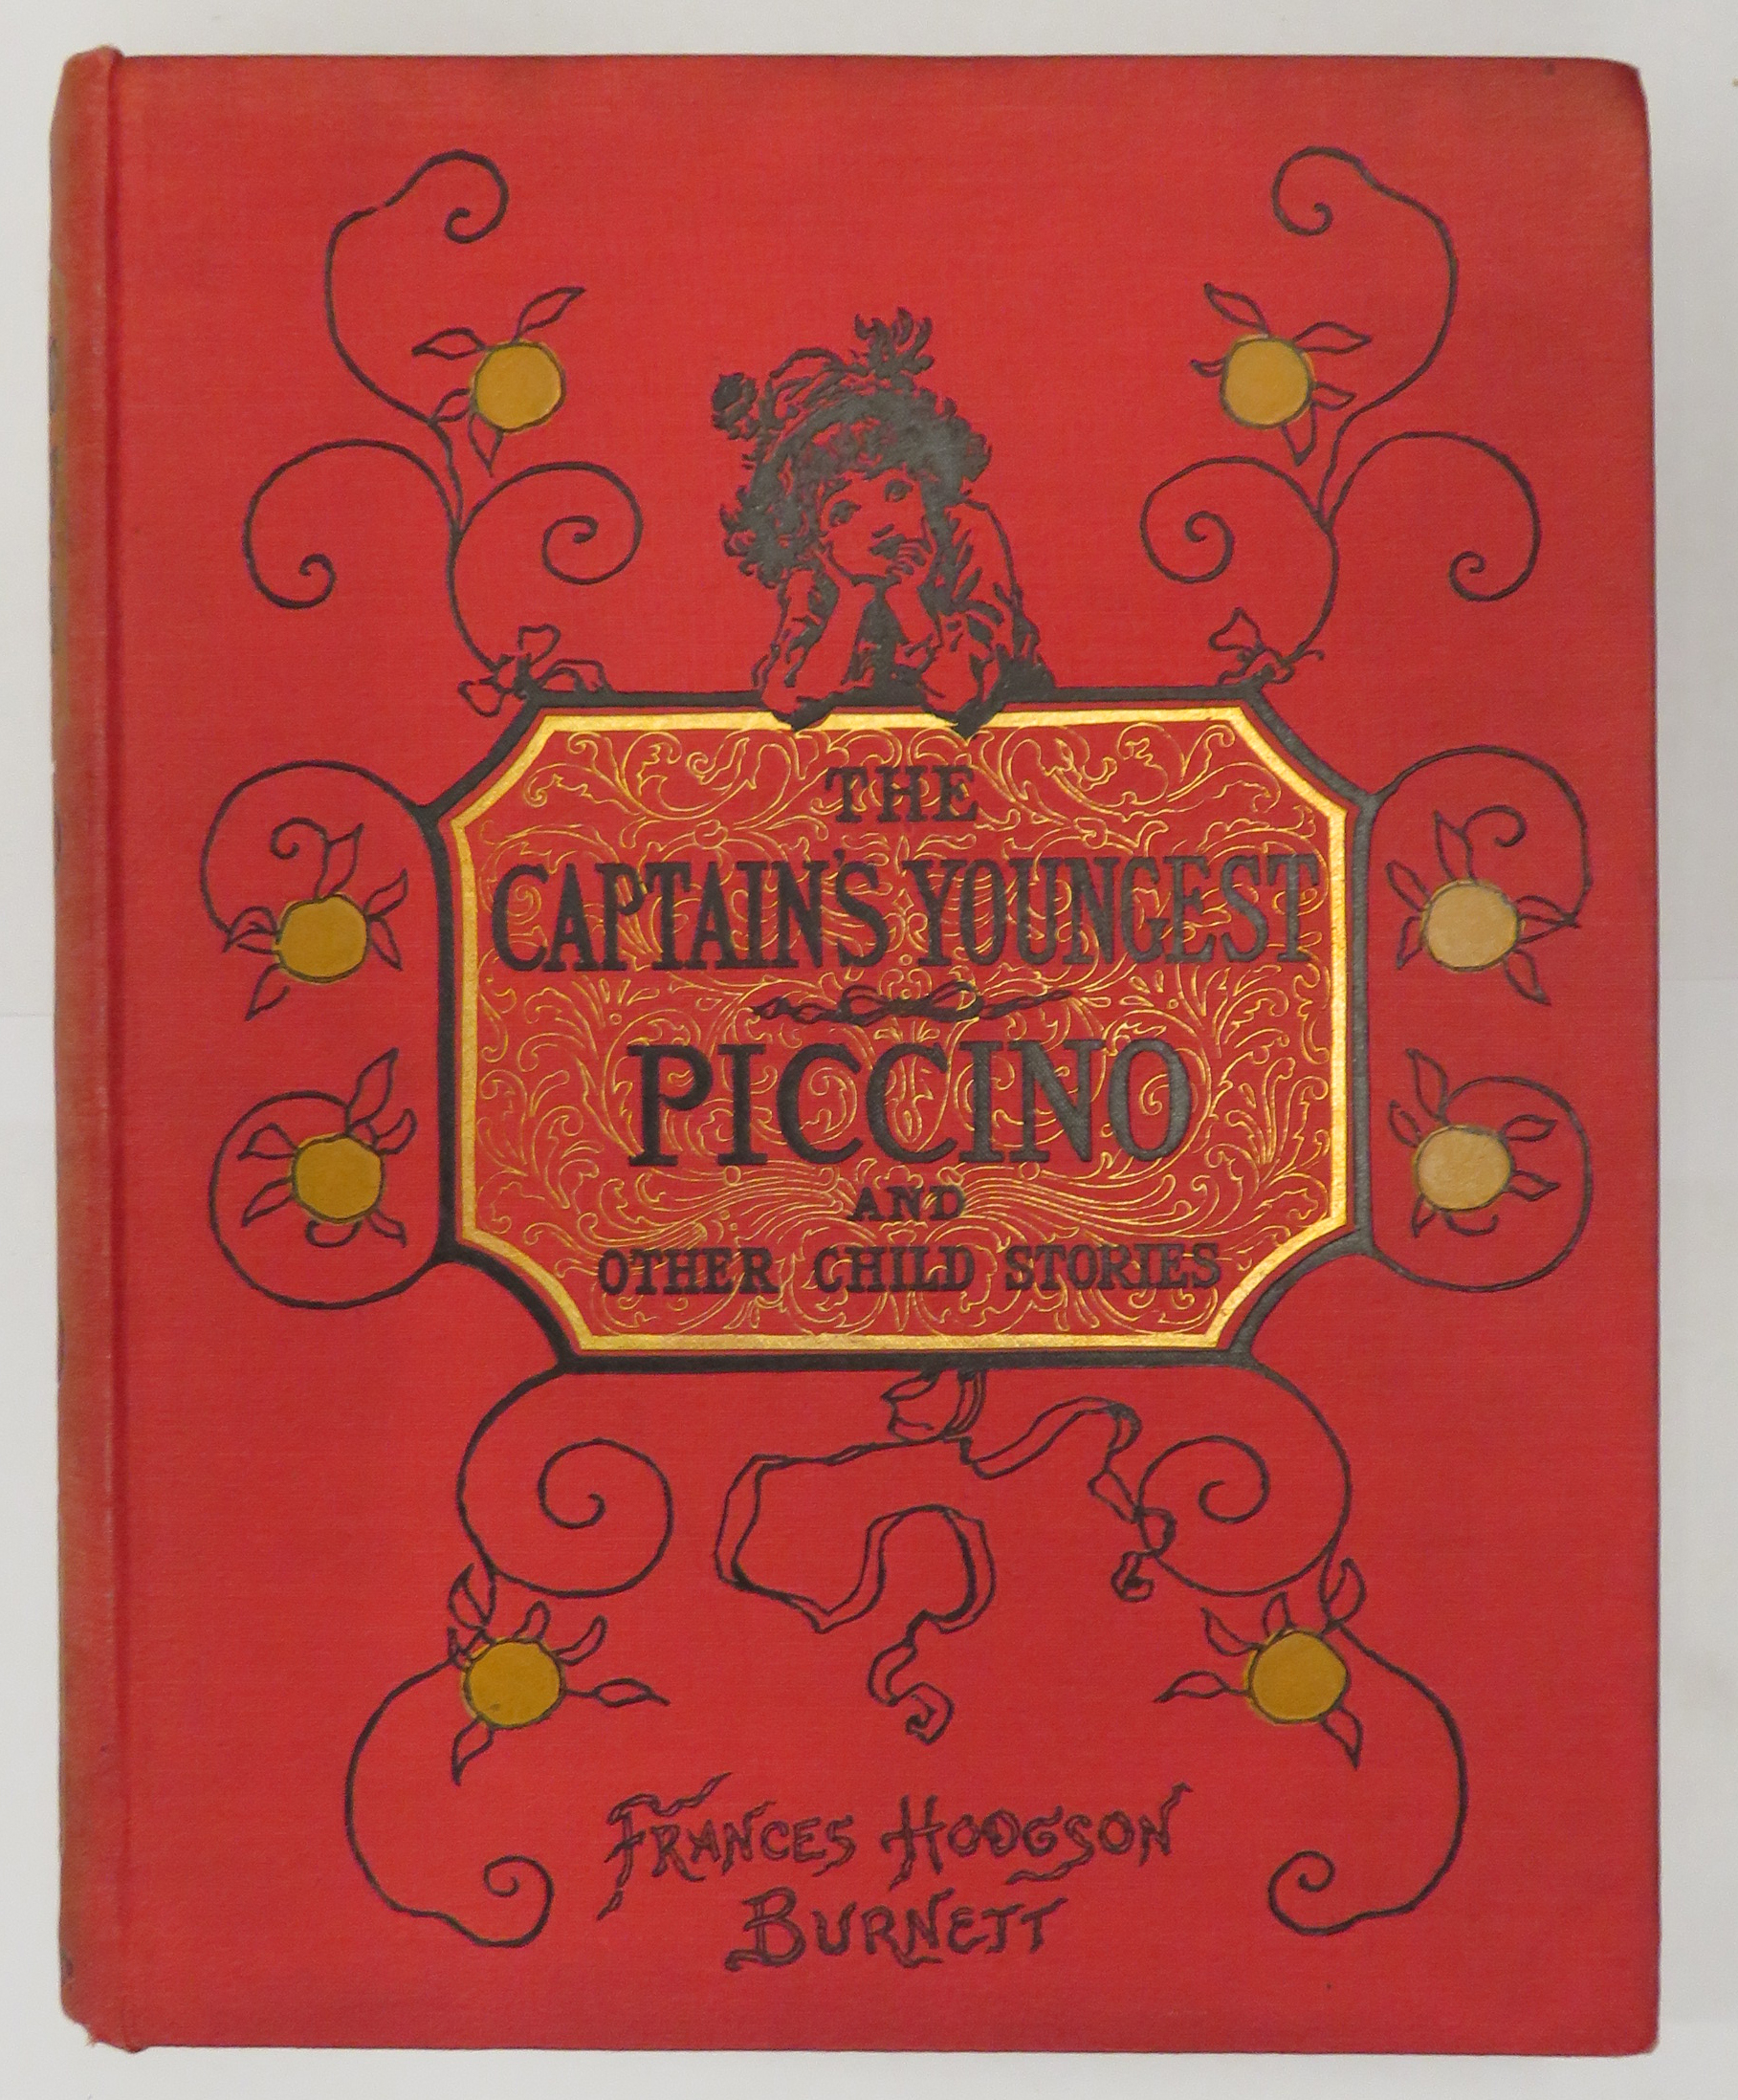 The Captain's Youngest Piccino and Other Child Stories